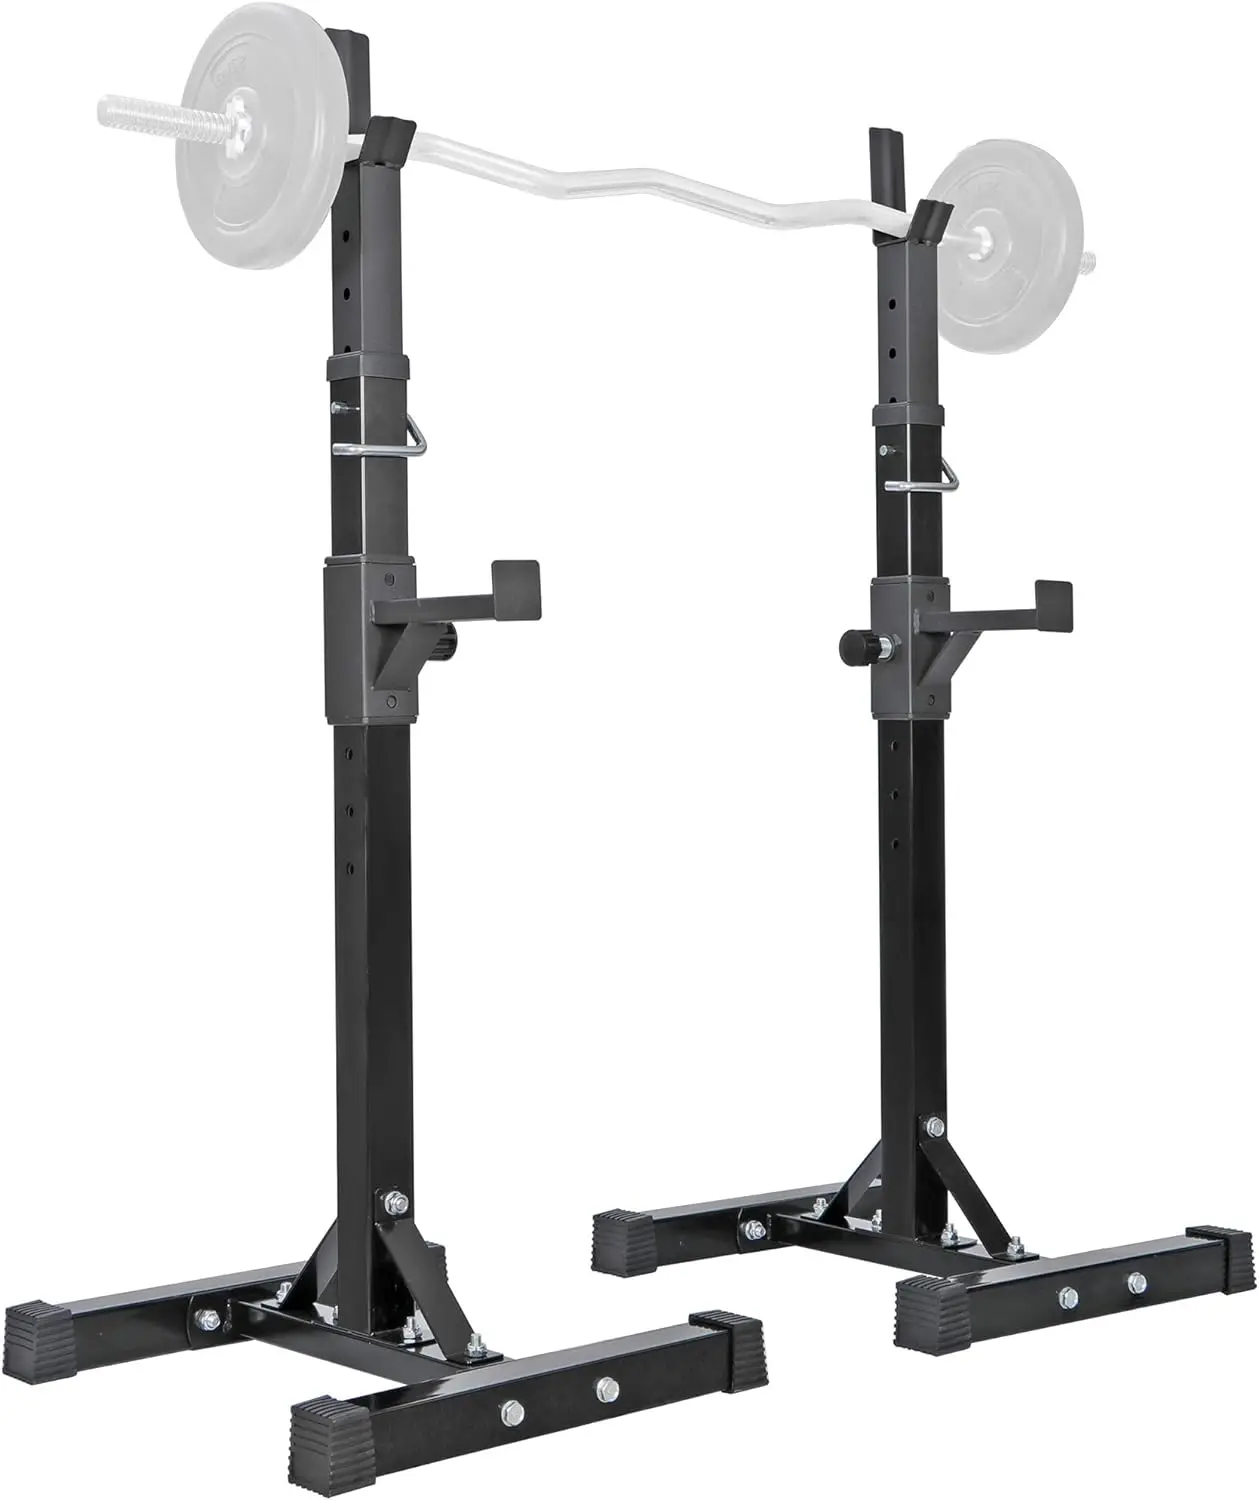 

of Adjustable Height 40"-66" Portable Dumbbell Racks Sturdy Steel Squat Barbell Free Bench Press Stands Home Gym Load 5